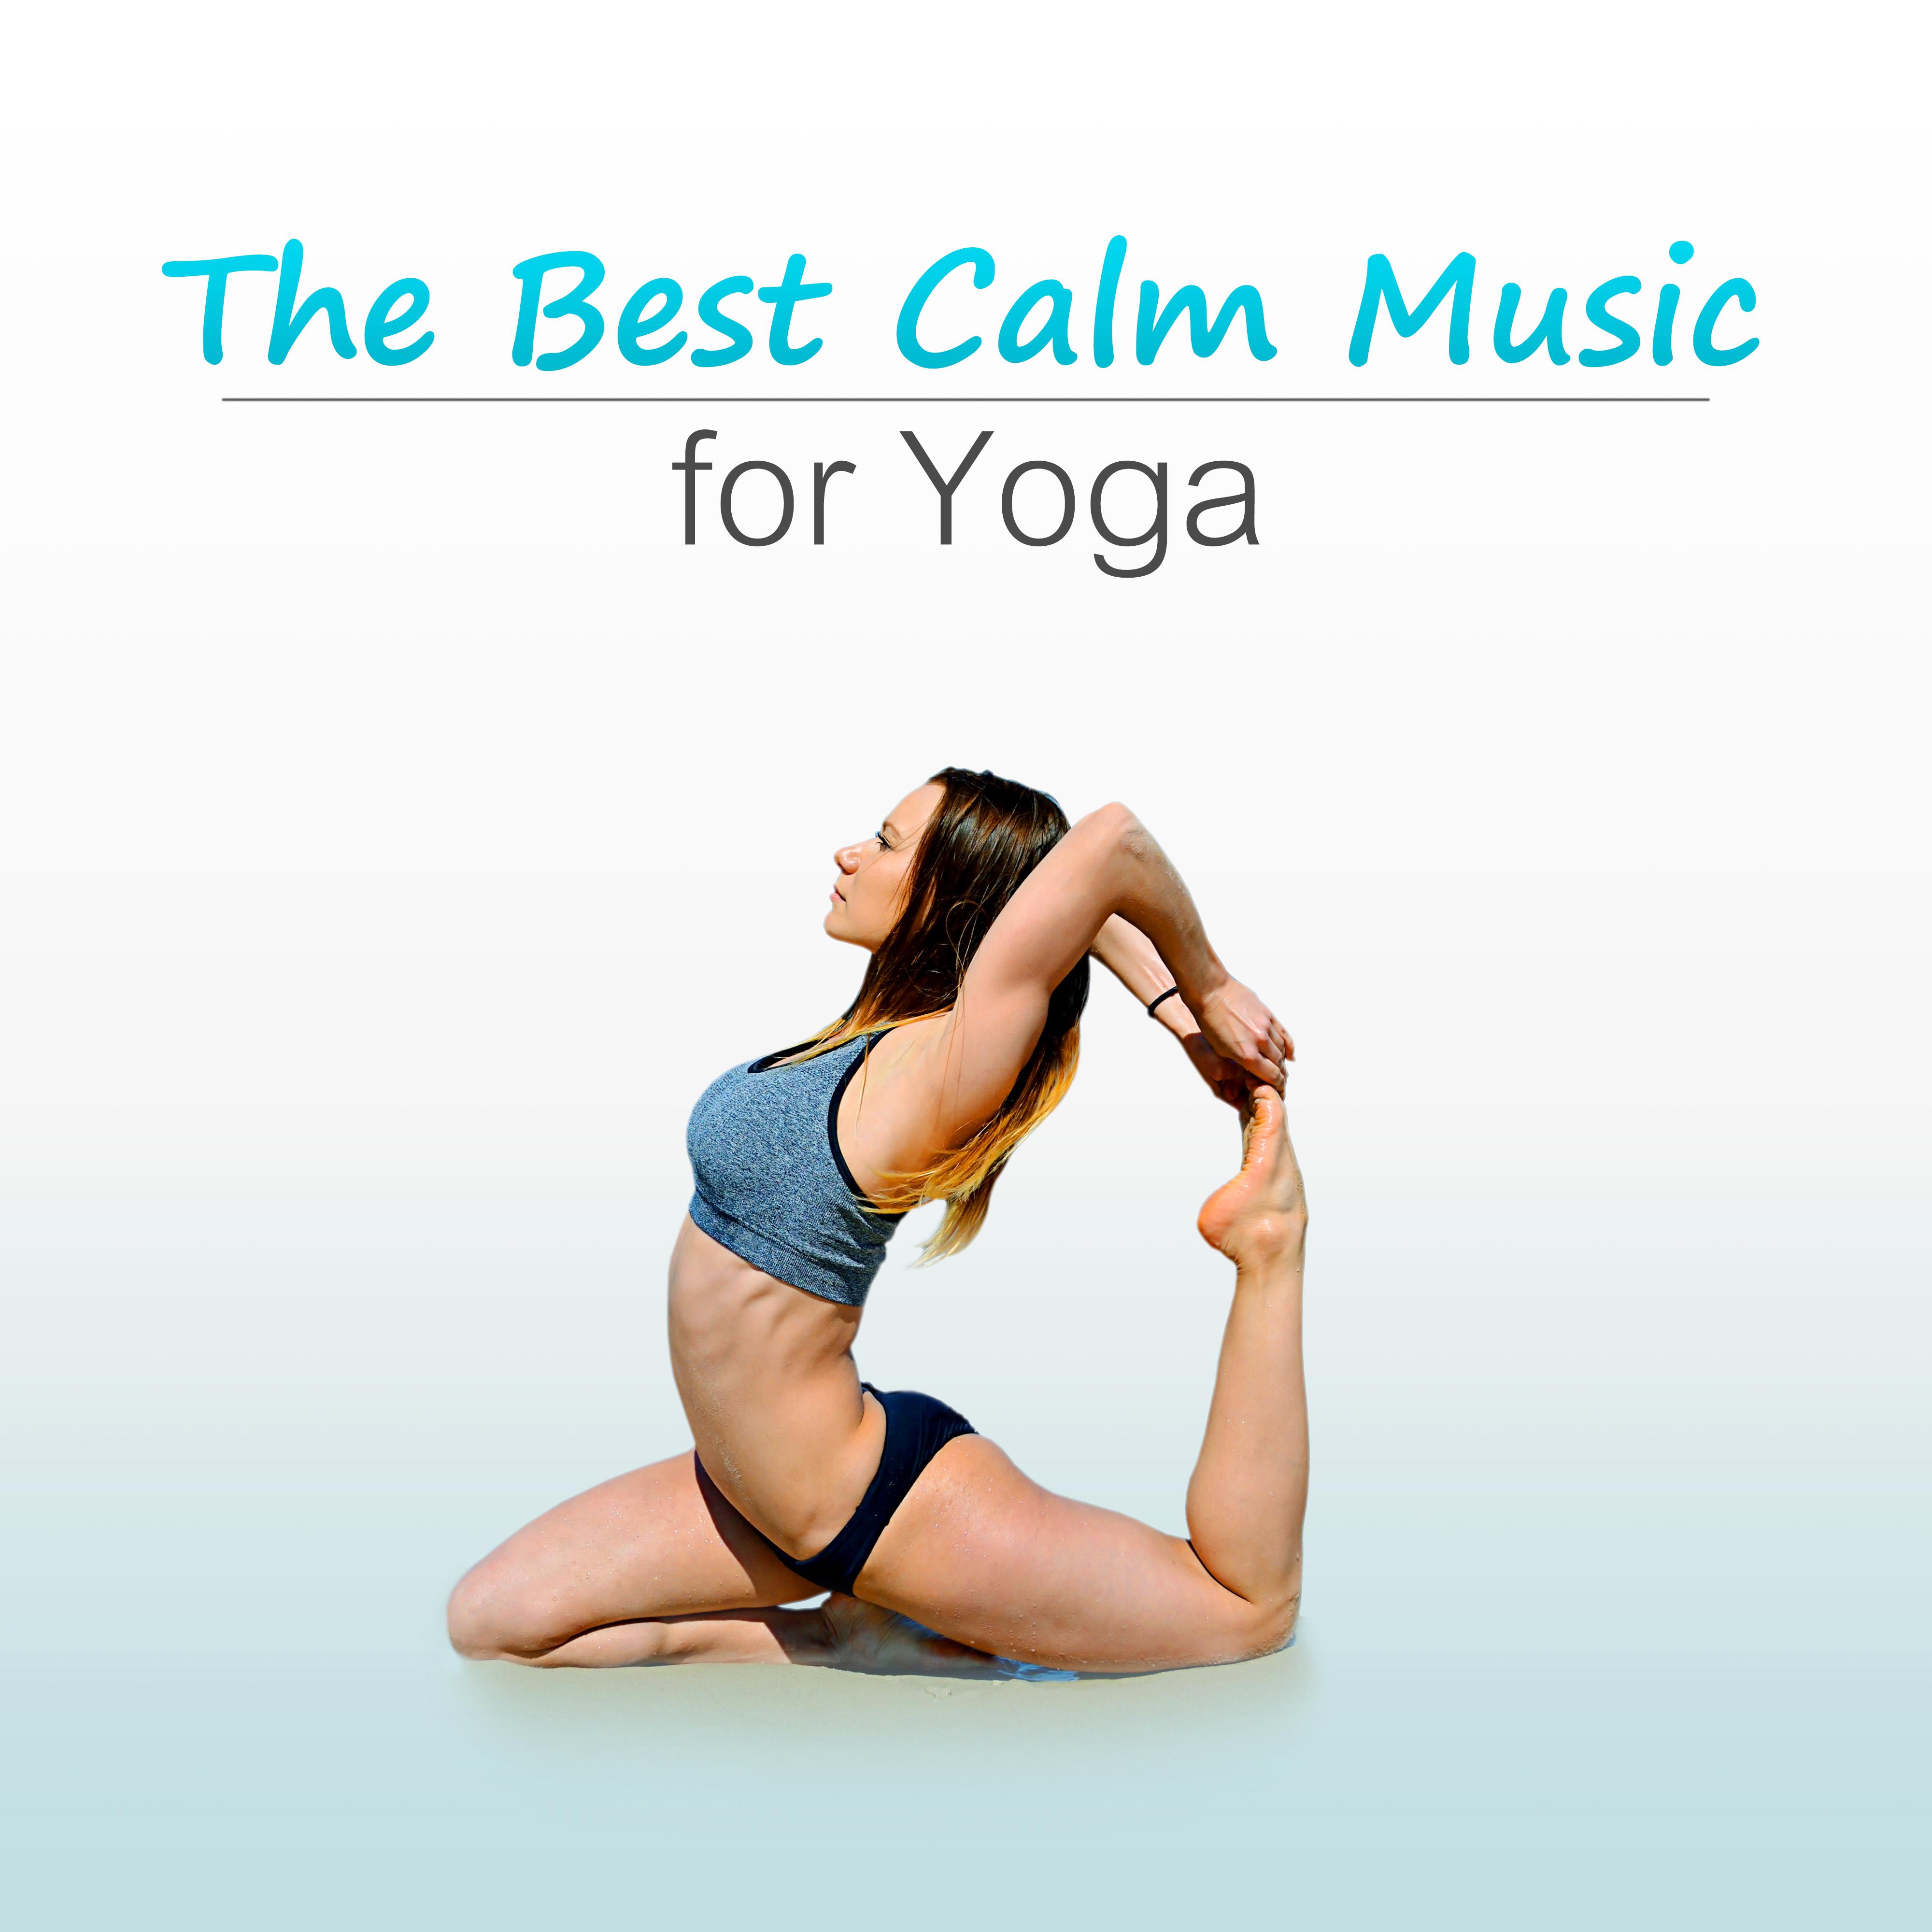 The Best Calm Music for Yoga  Corepower Yoga Poses to Be Fit and Workout, Get Strength and Flexibility, Pilates Exercises, Relaxation Music for Weigh Loss